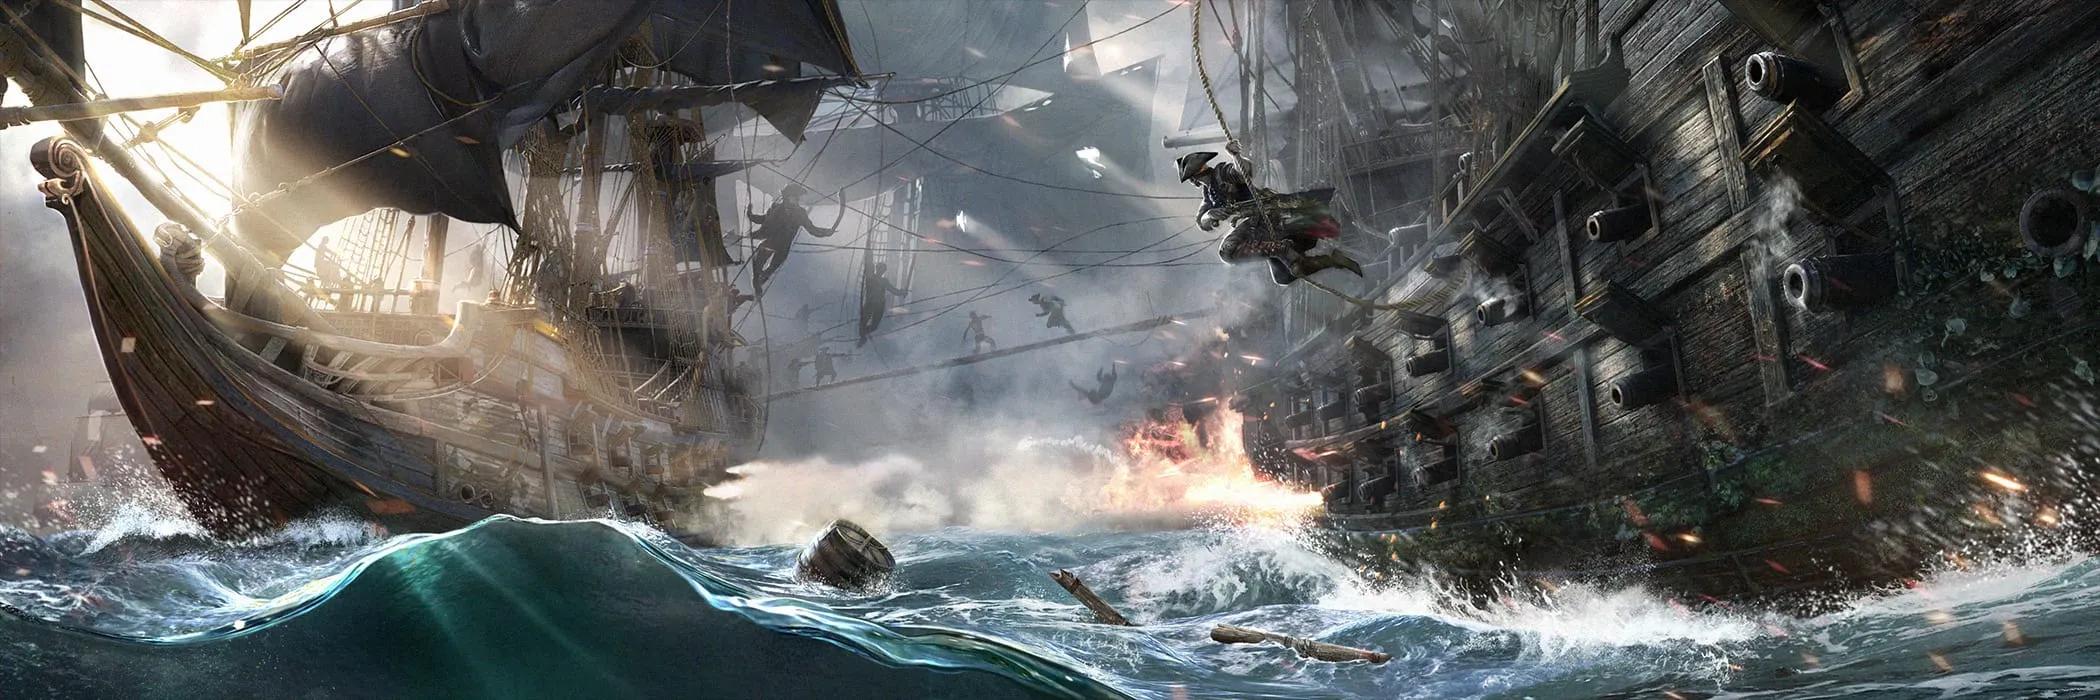 Pirates of the Caribbean: Master of the Seas Strategy Game